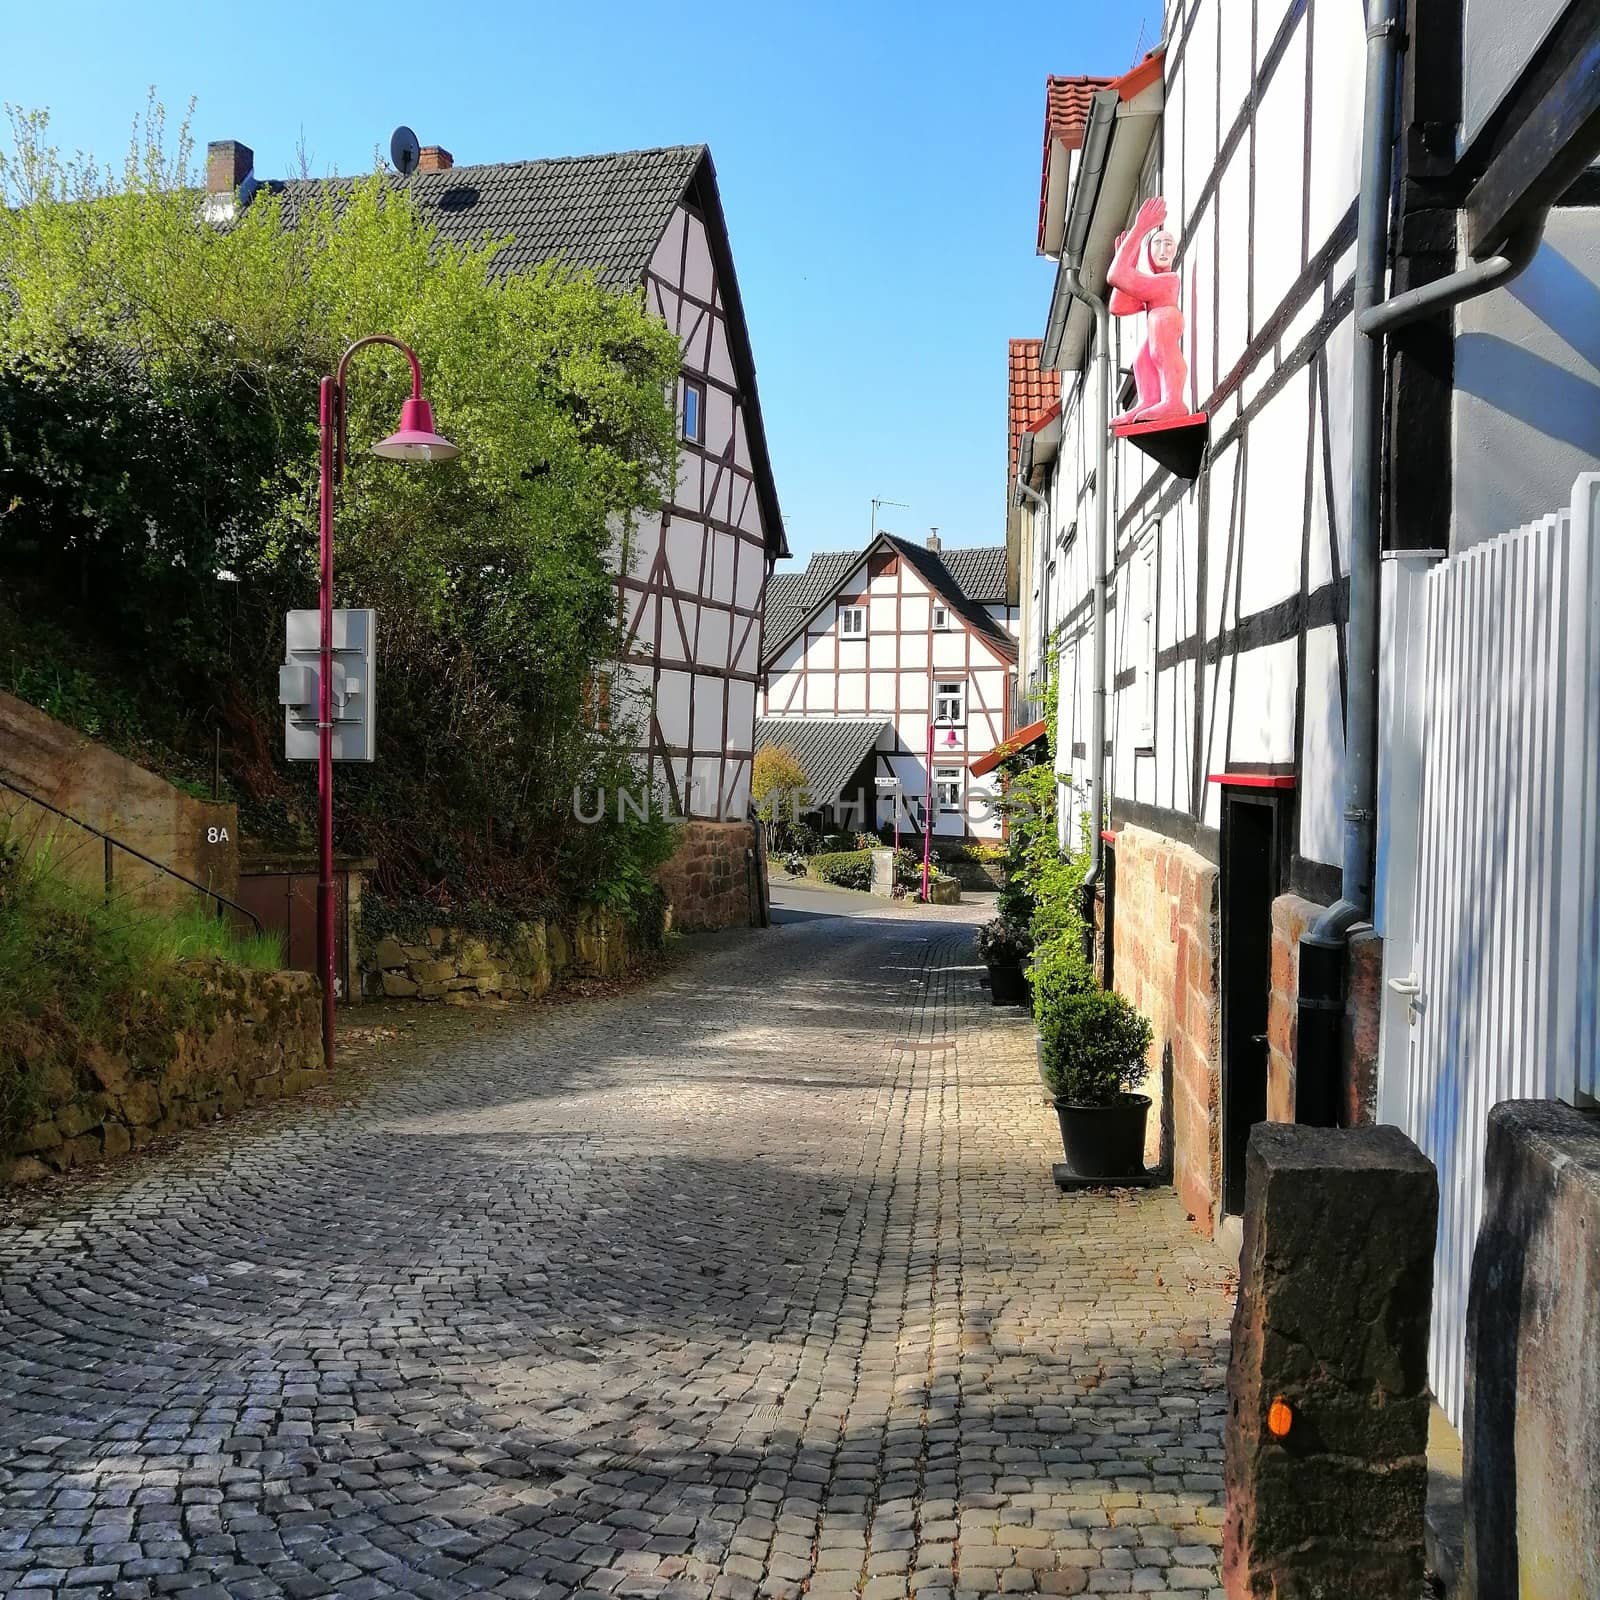 street with old houses in historic city of Kaufungen, Germany by Lenkapenka